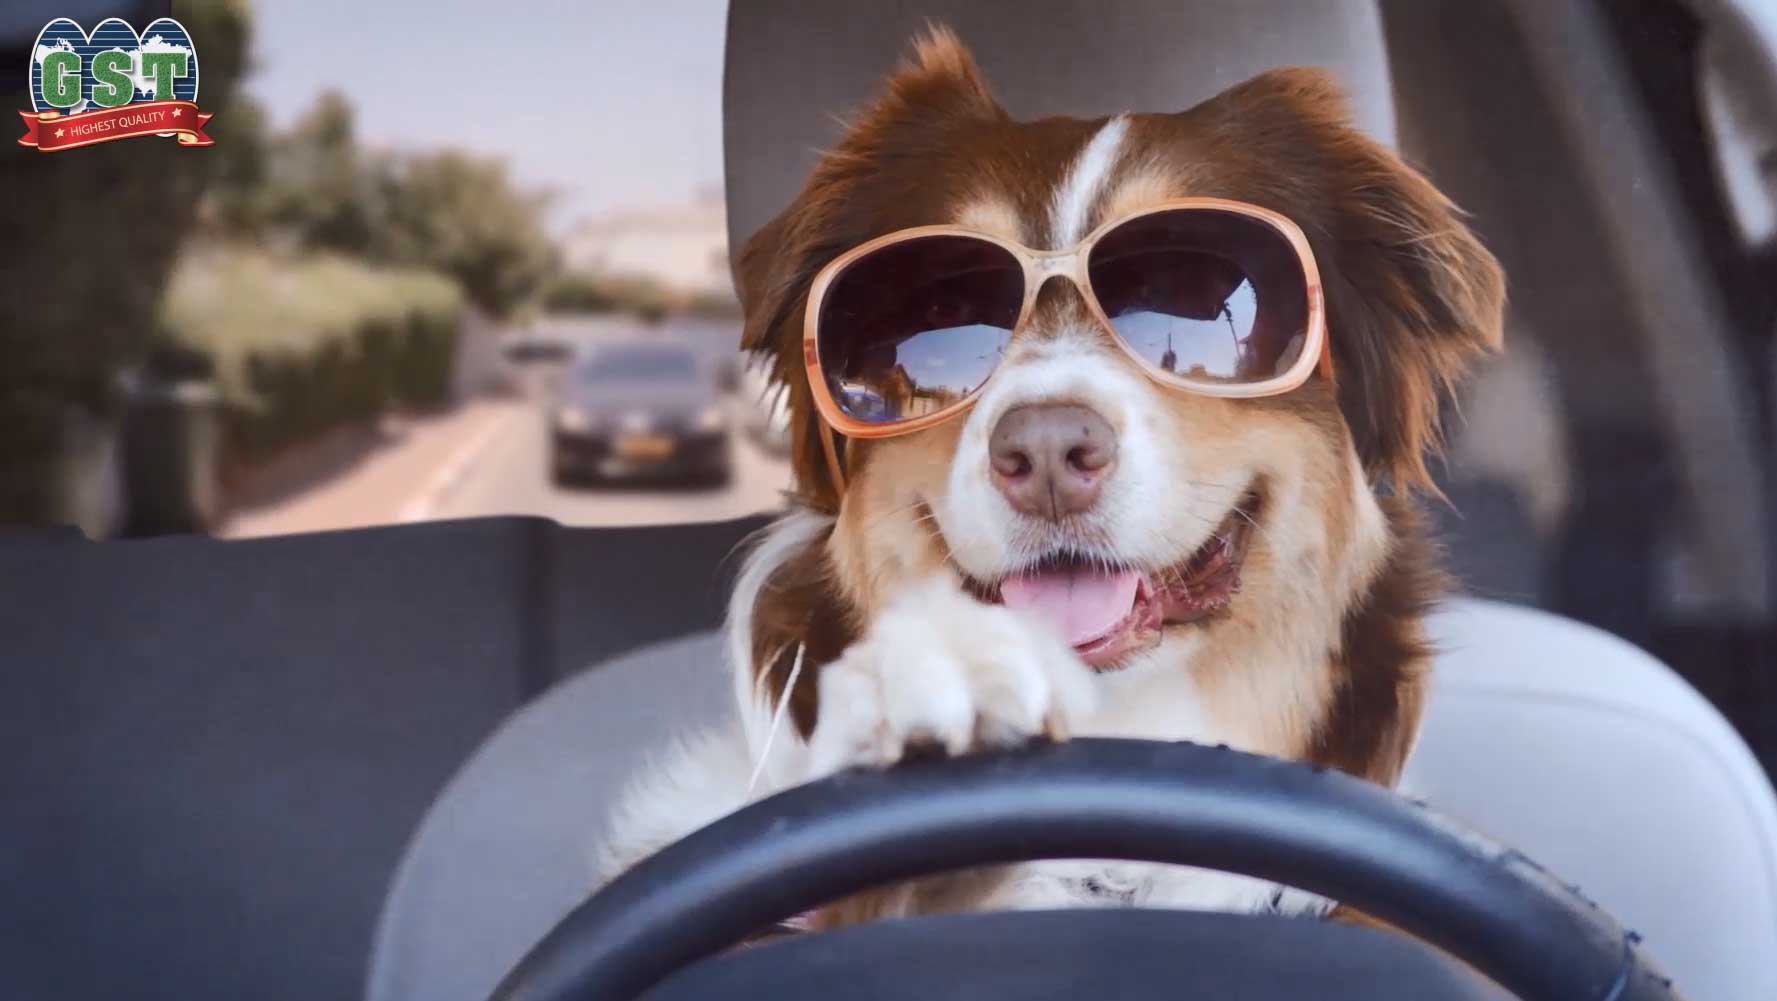 Dog in glasses drives a car